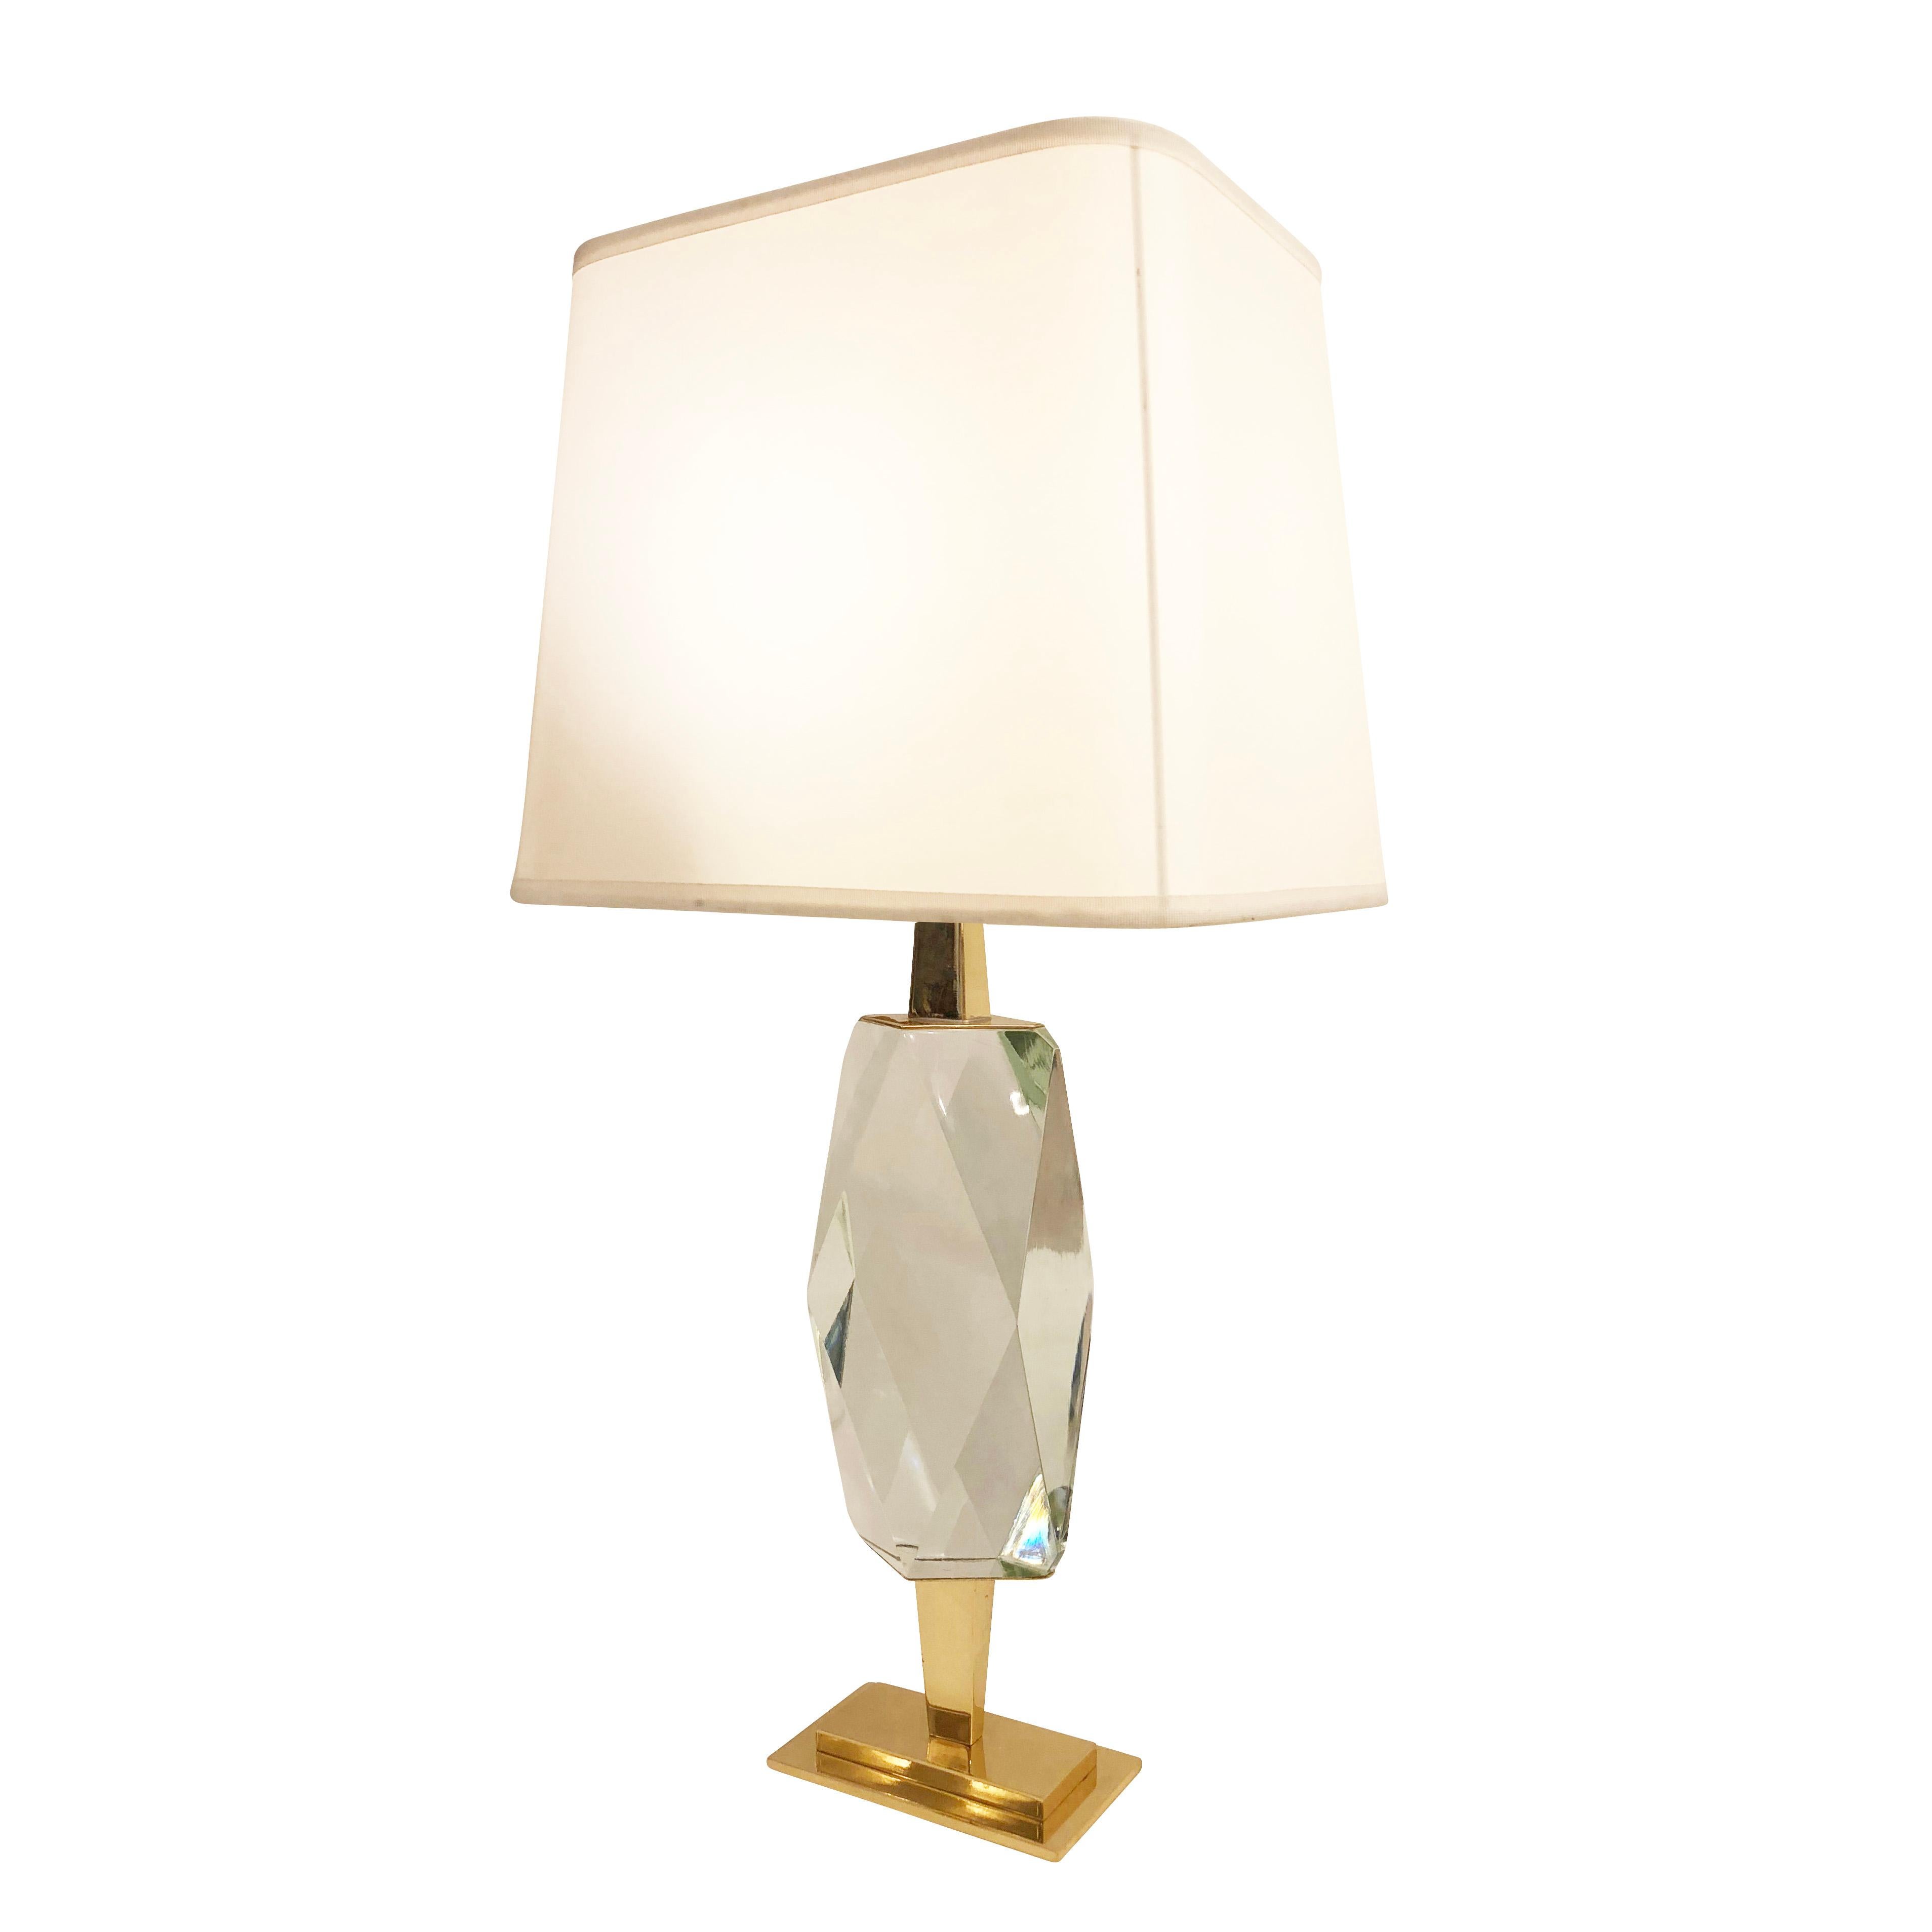 Contemporary Prisma Table Lamp by formA, Short Version